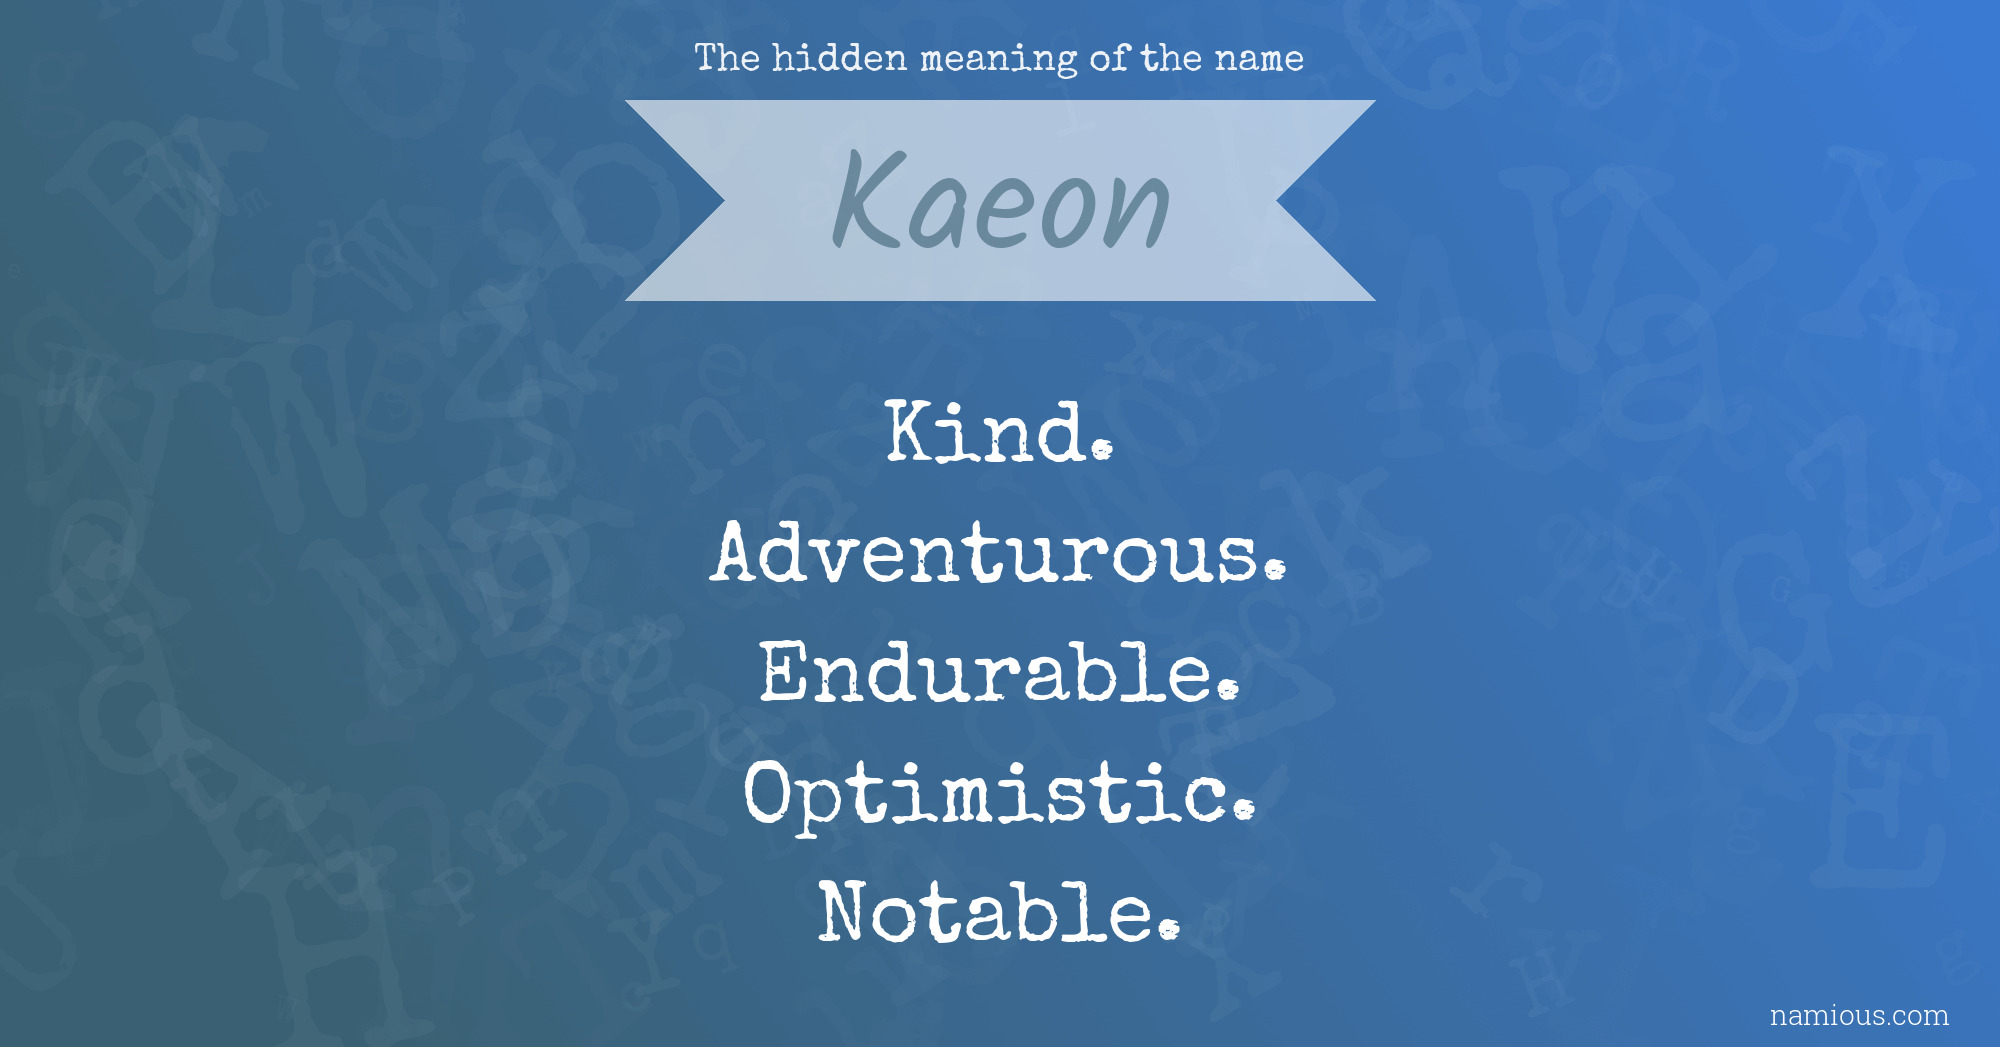 The hidden meaning of the name Kaeon